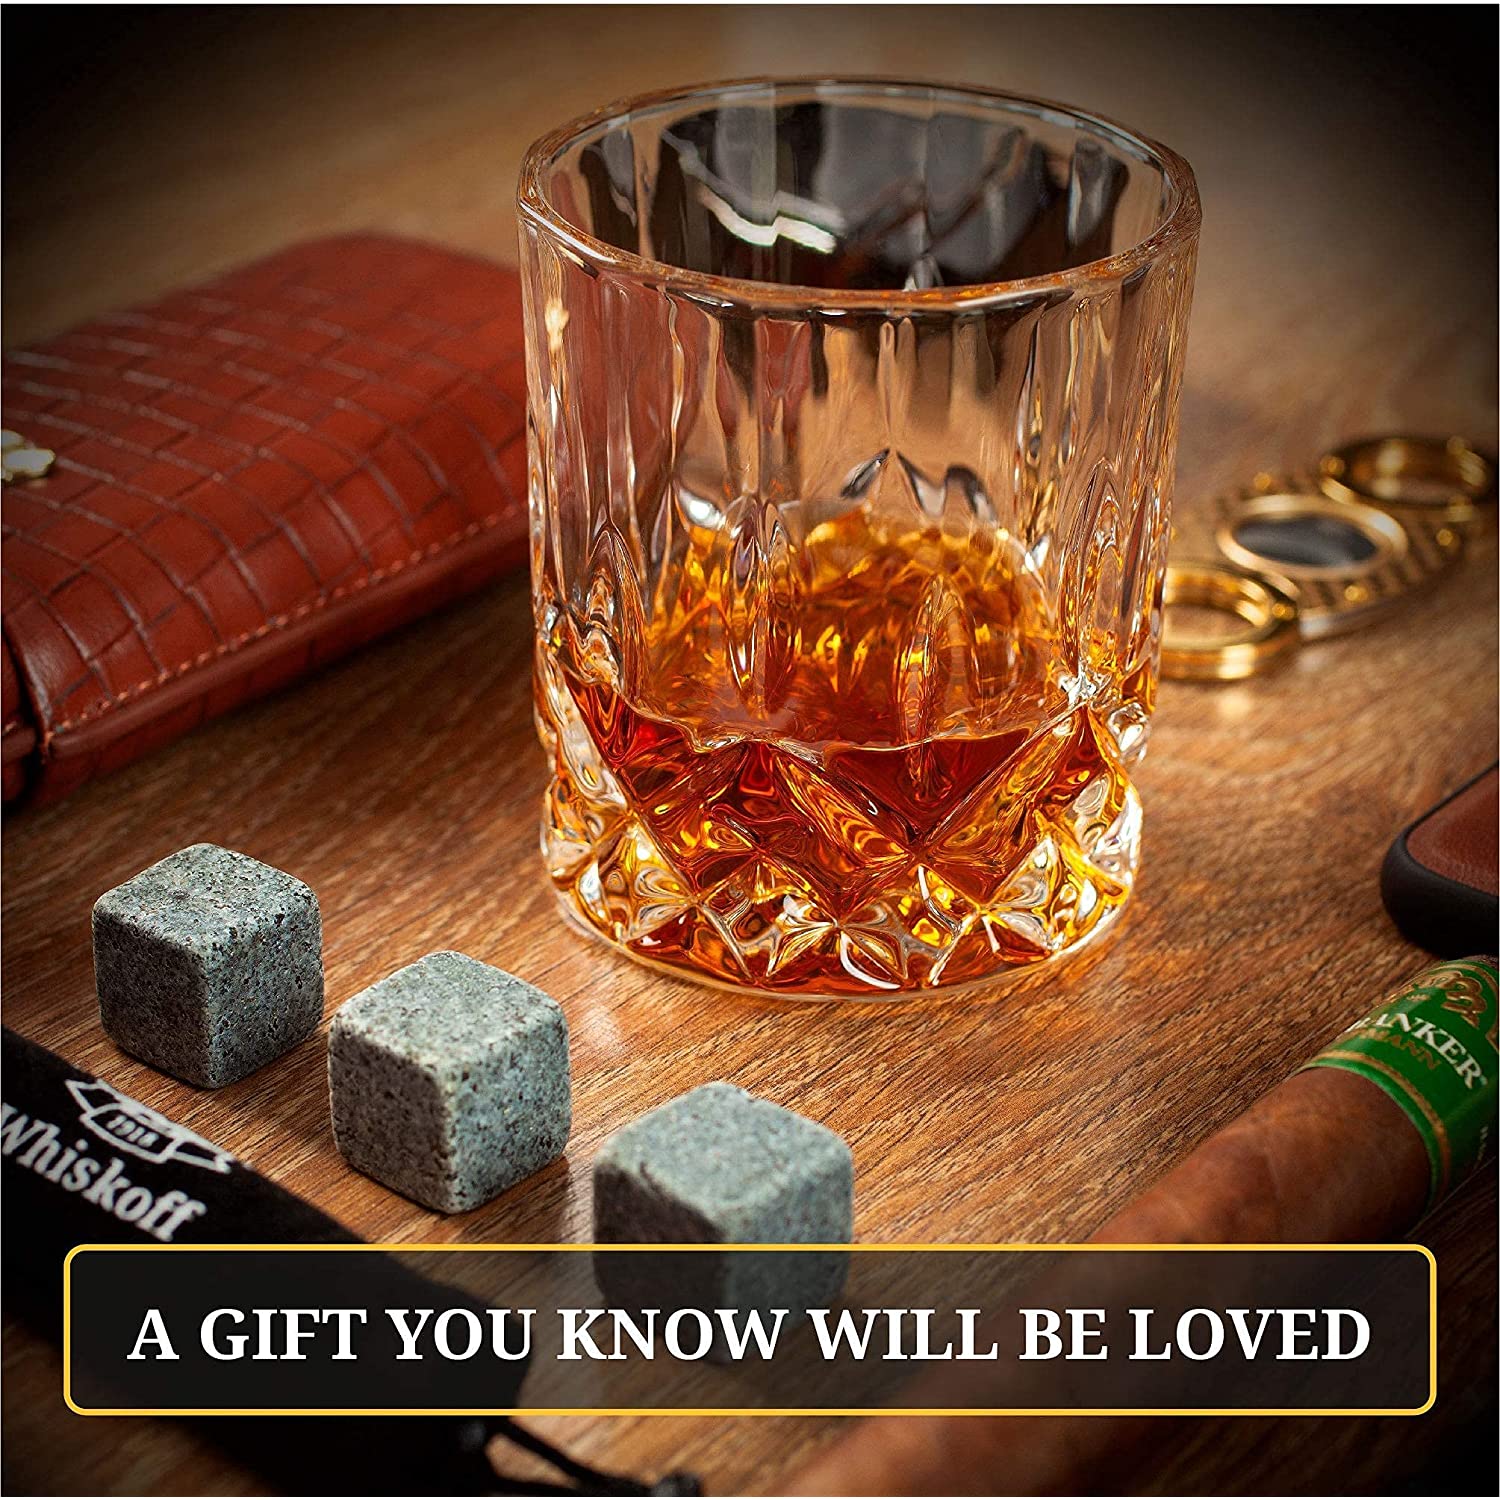 Whiskey Decanter and Stones Gift Set for Men - Whiskey Decanter, 2 Rocks  Whiskey Glasses, 8 Stainless Steel Whisky Cubes, 2 Slate Coasters, Special